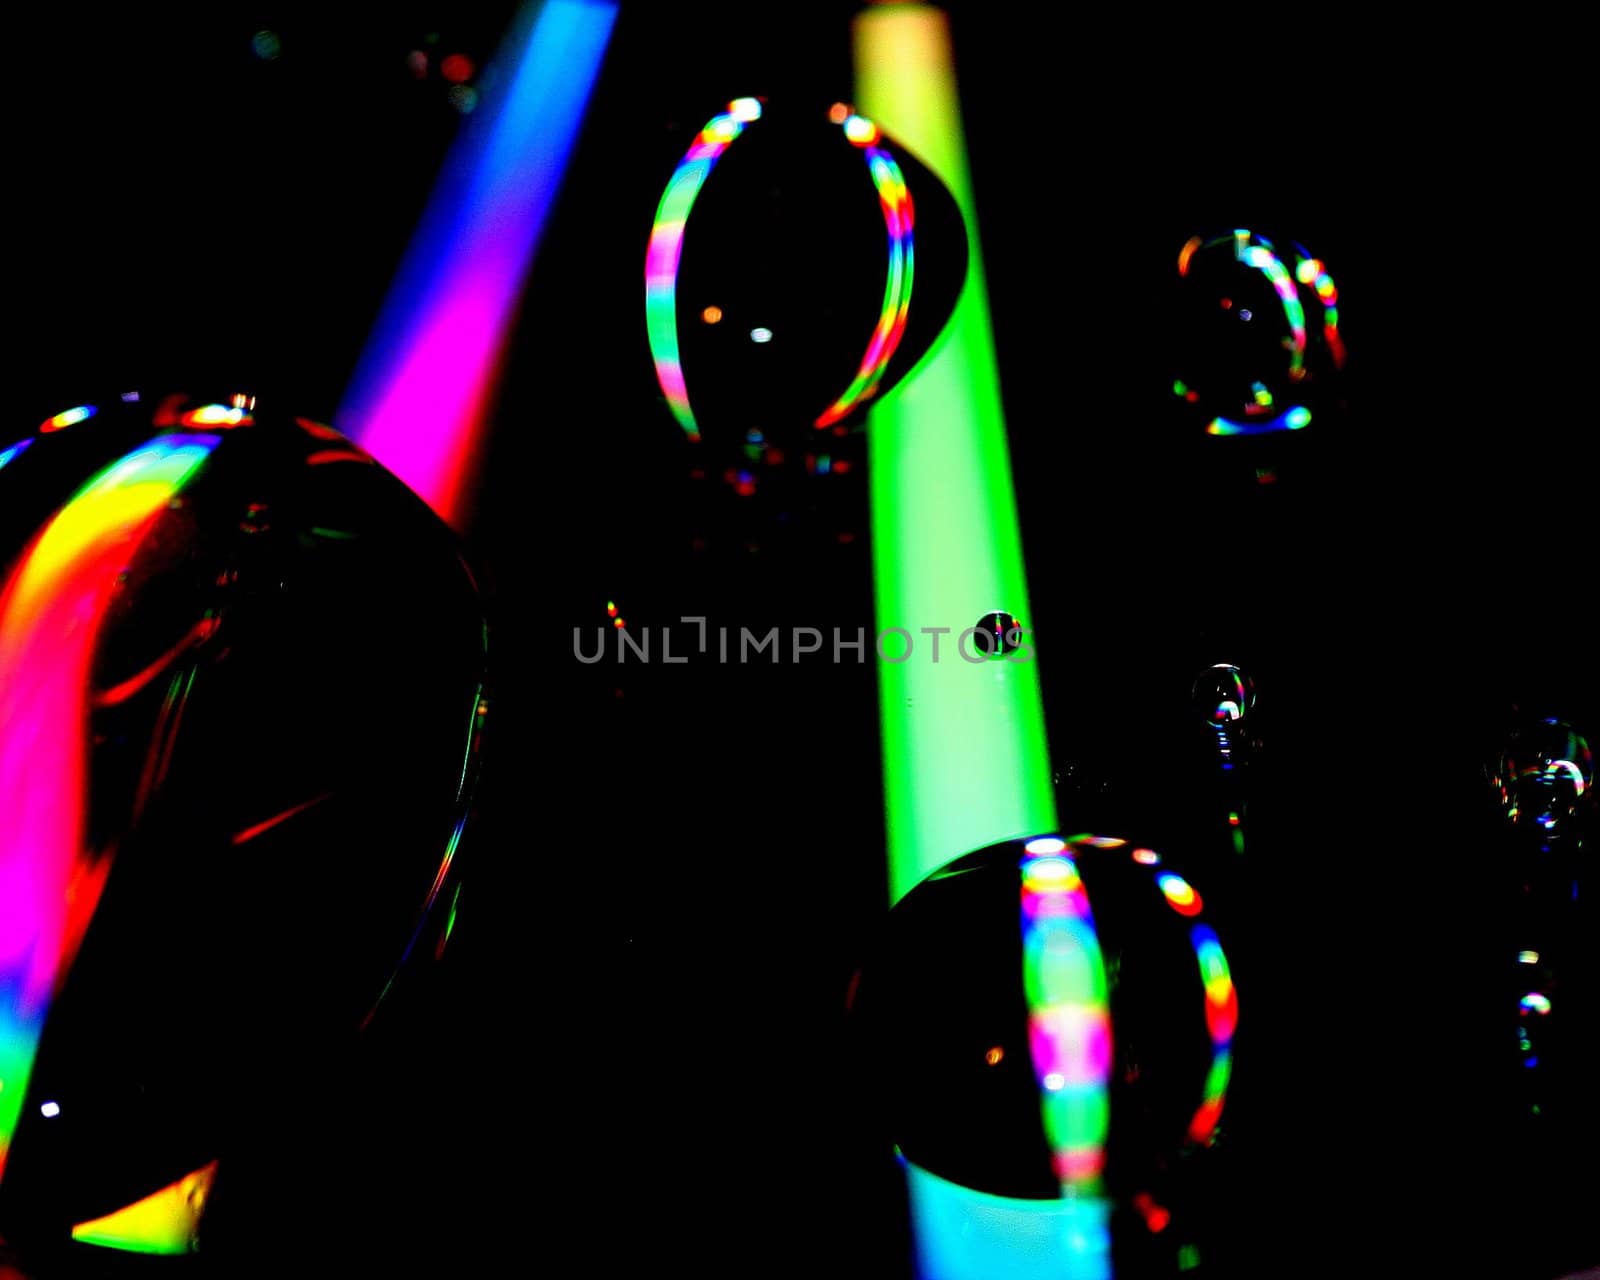 Beams Of Colour And Light by quackersnaps